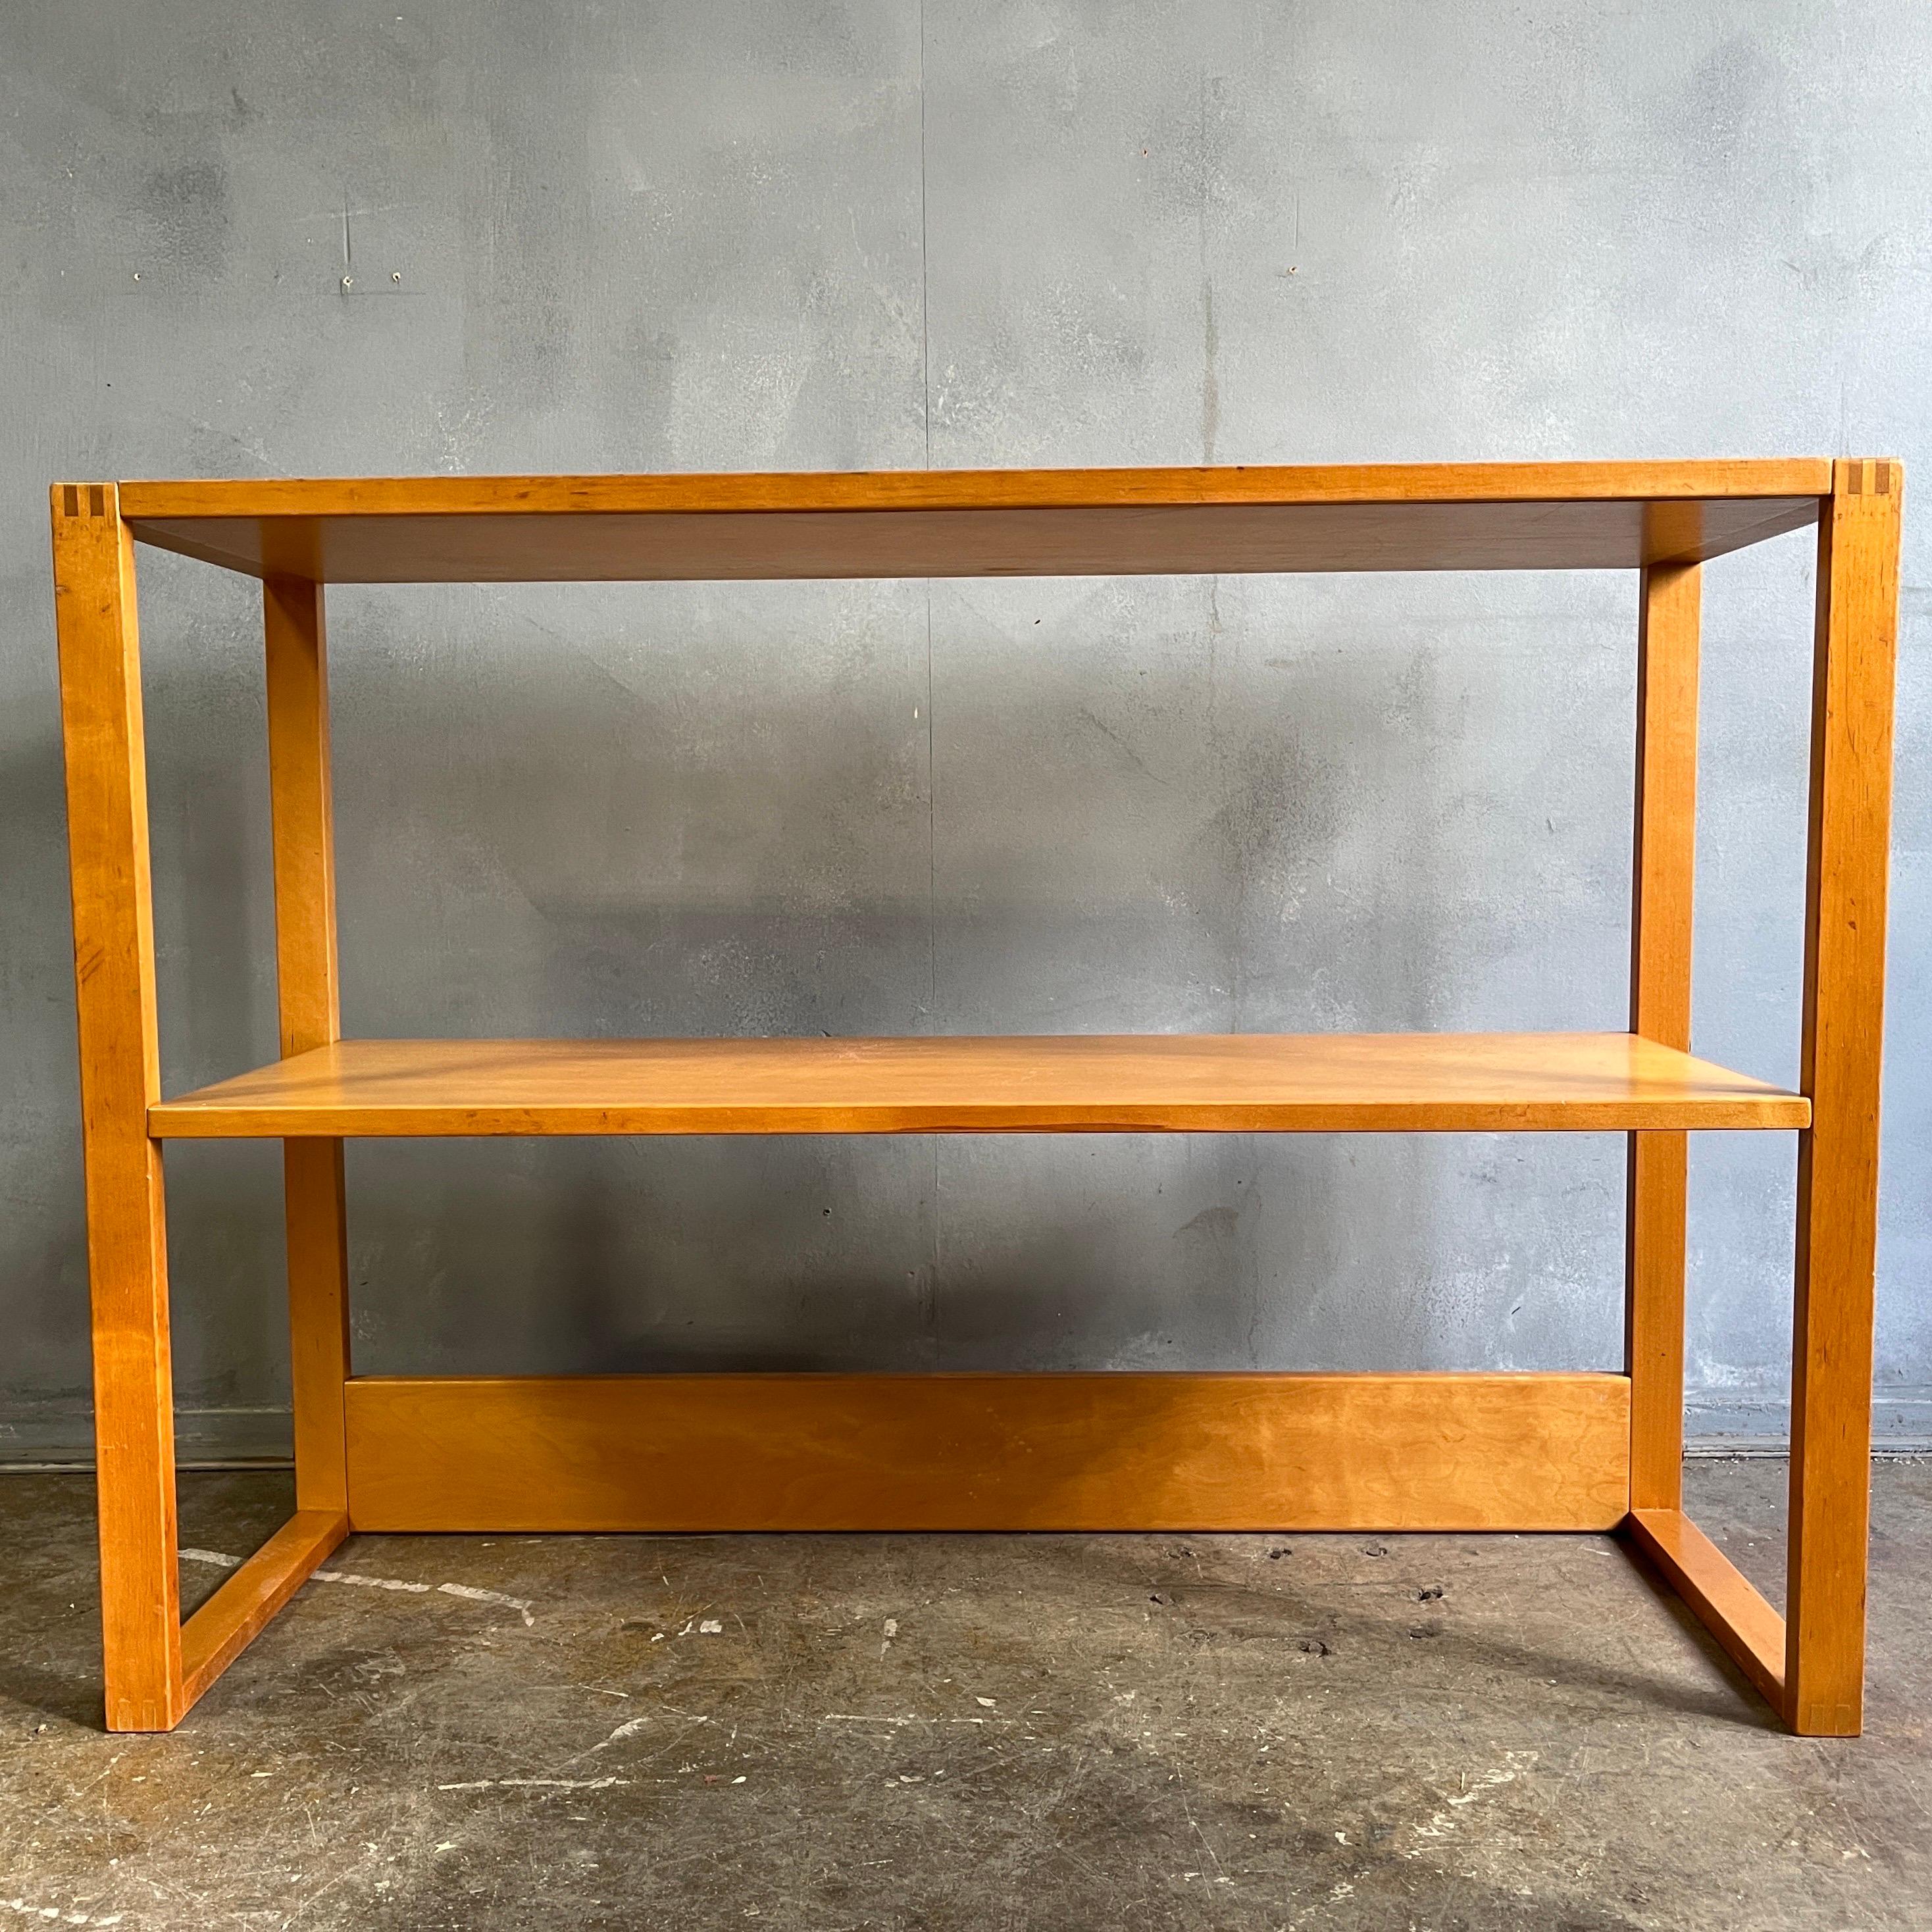 Midcentury two tier bookcase featuring a fixed middle shelf on sled base. Beautiful finger joints and brass screw details with original patina. Very solid handsome piece that would pair well with Mccobb, Eames, or Aalto designs.

Bottom shelf is